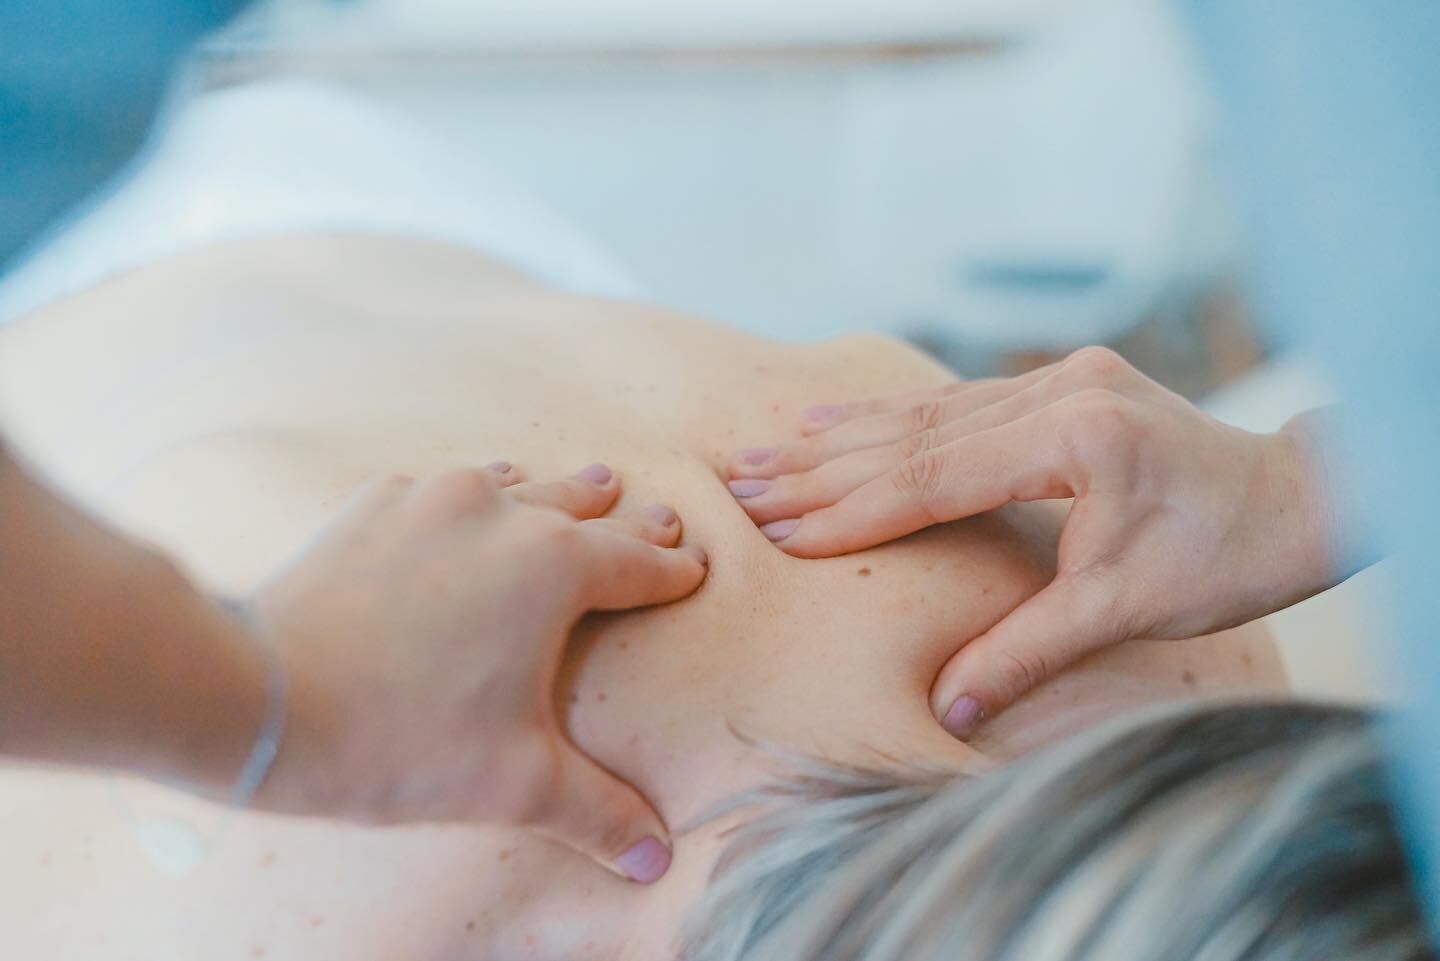 💆🏽&zwj;♀️A STRESS RELIEVING, RELAXING, UNWINDING DEEP MASSAGE - YES PLEASE!💆🏽&zwj;♂️
 
Did you know we offer massage therapy at Osteocure clinic with our two exceptional massage therapists!
 
Massage can be a fantastic way to unwind and take some